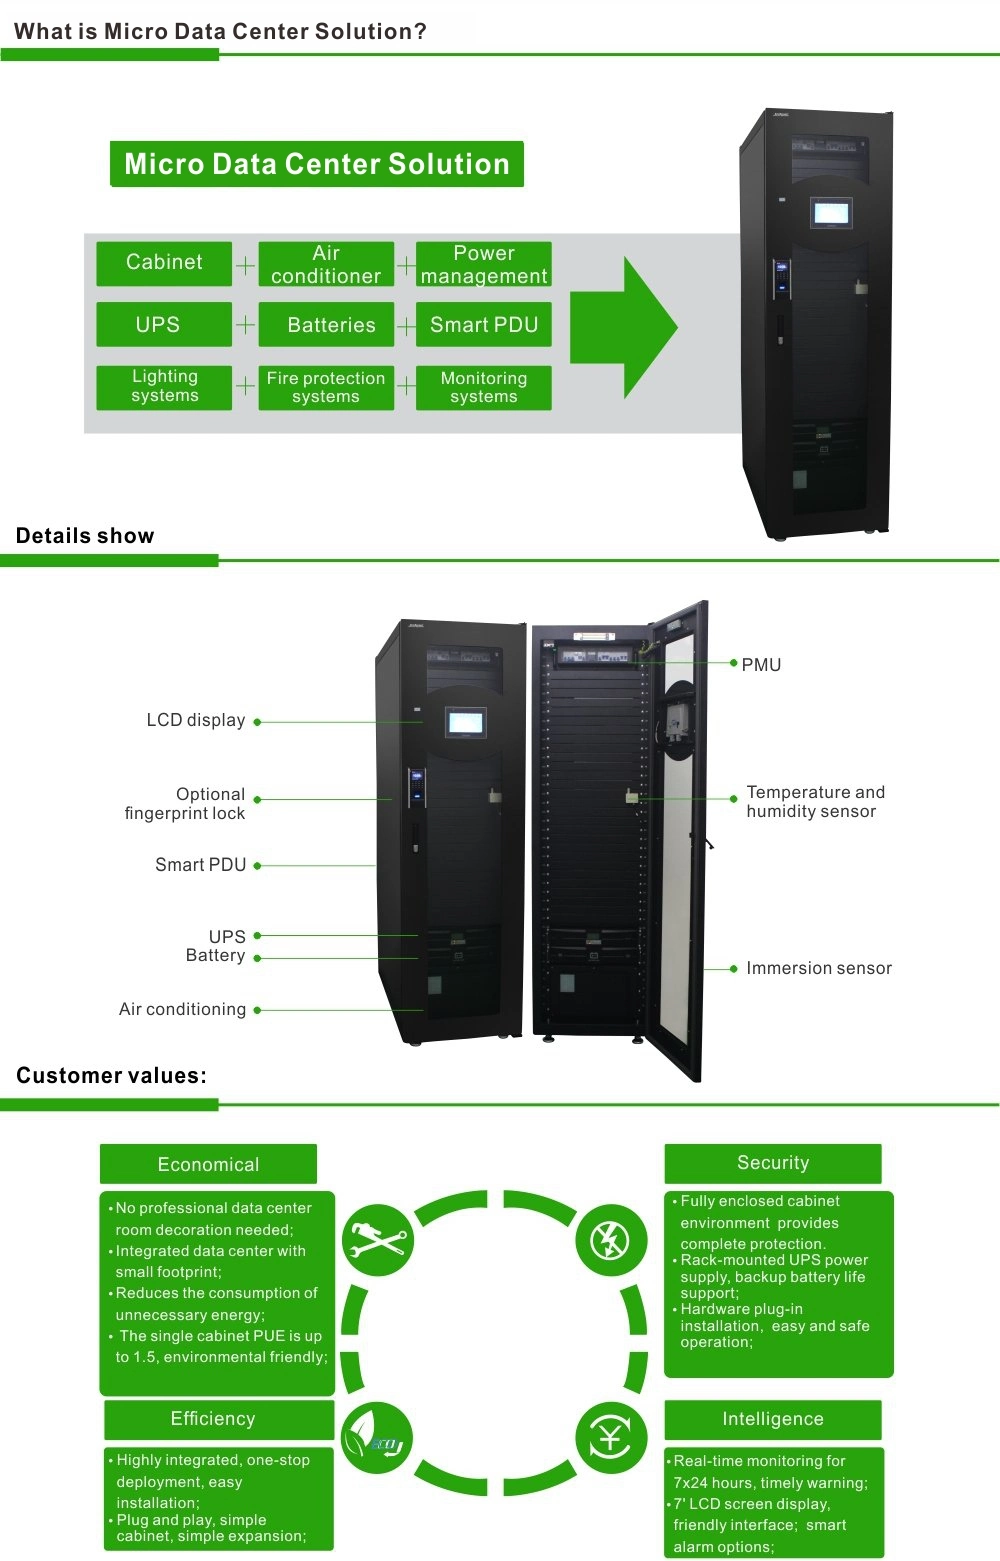 Made in China Superior Quality Popular 42u Server Rack Floor Standing Network Cabinet